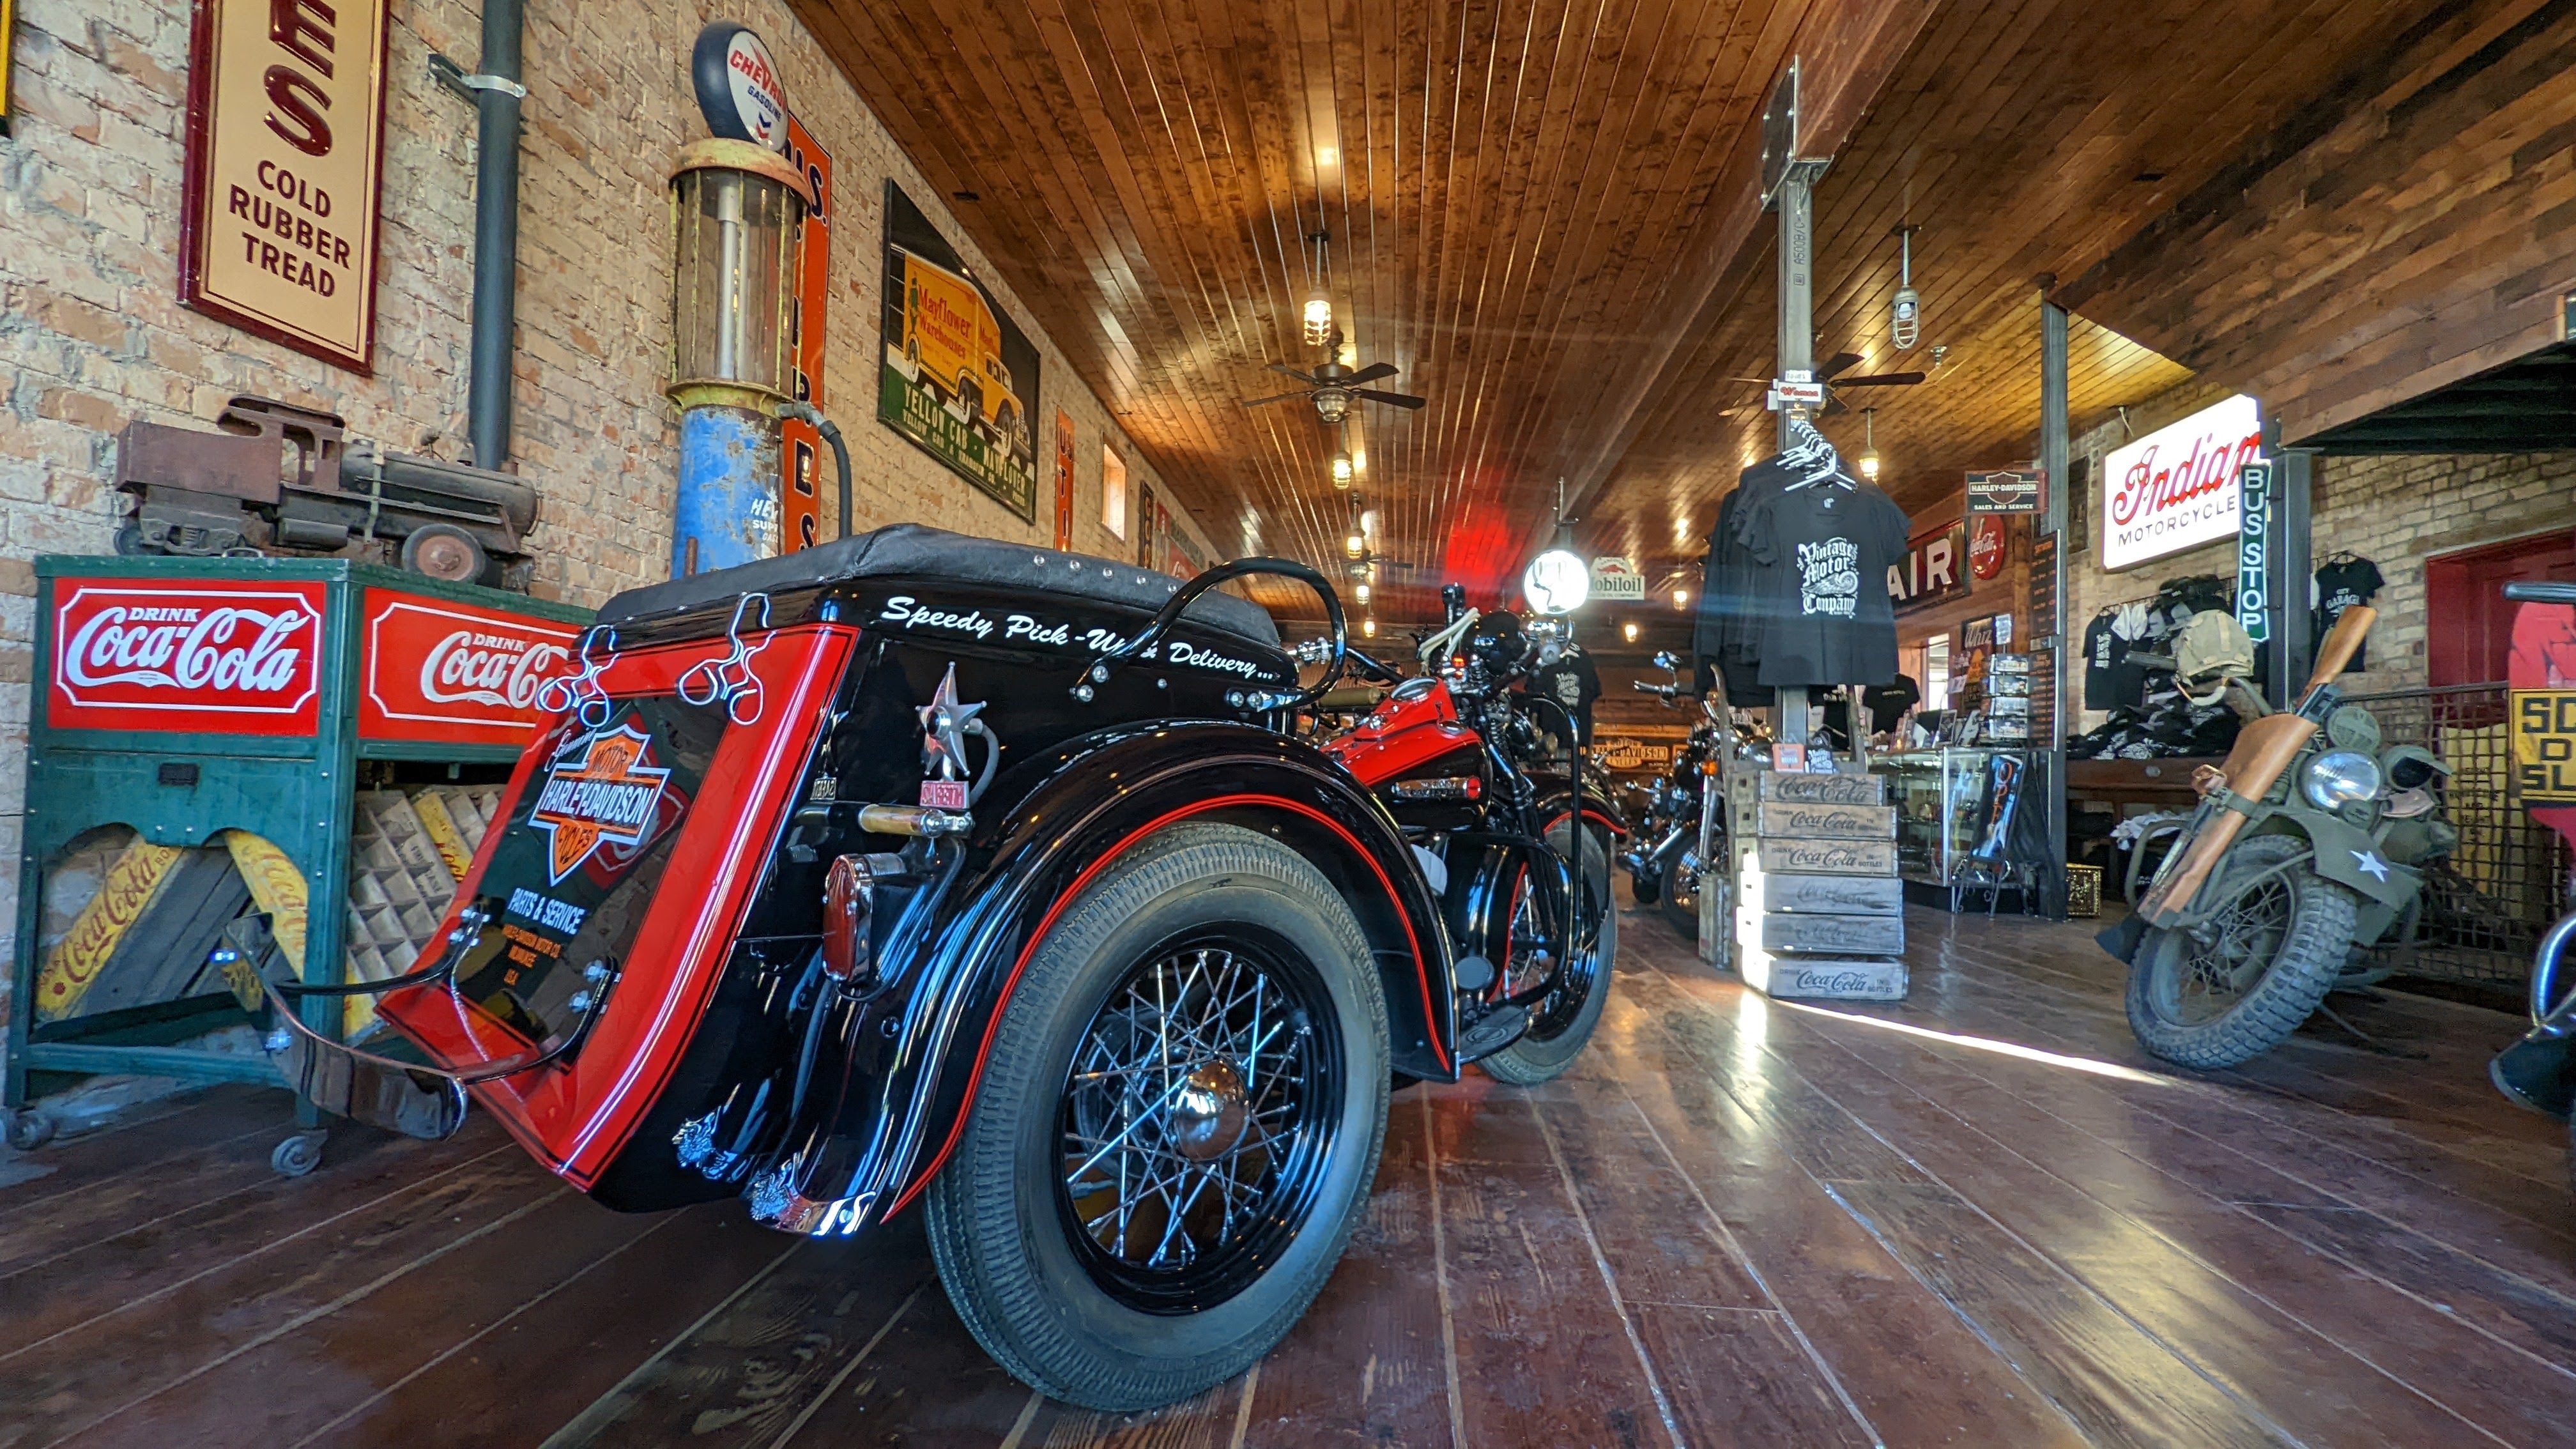 Antique motorcycles fill a room with a wood floor, wood ceiling and brick walls.